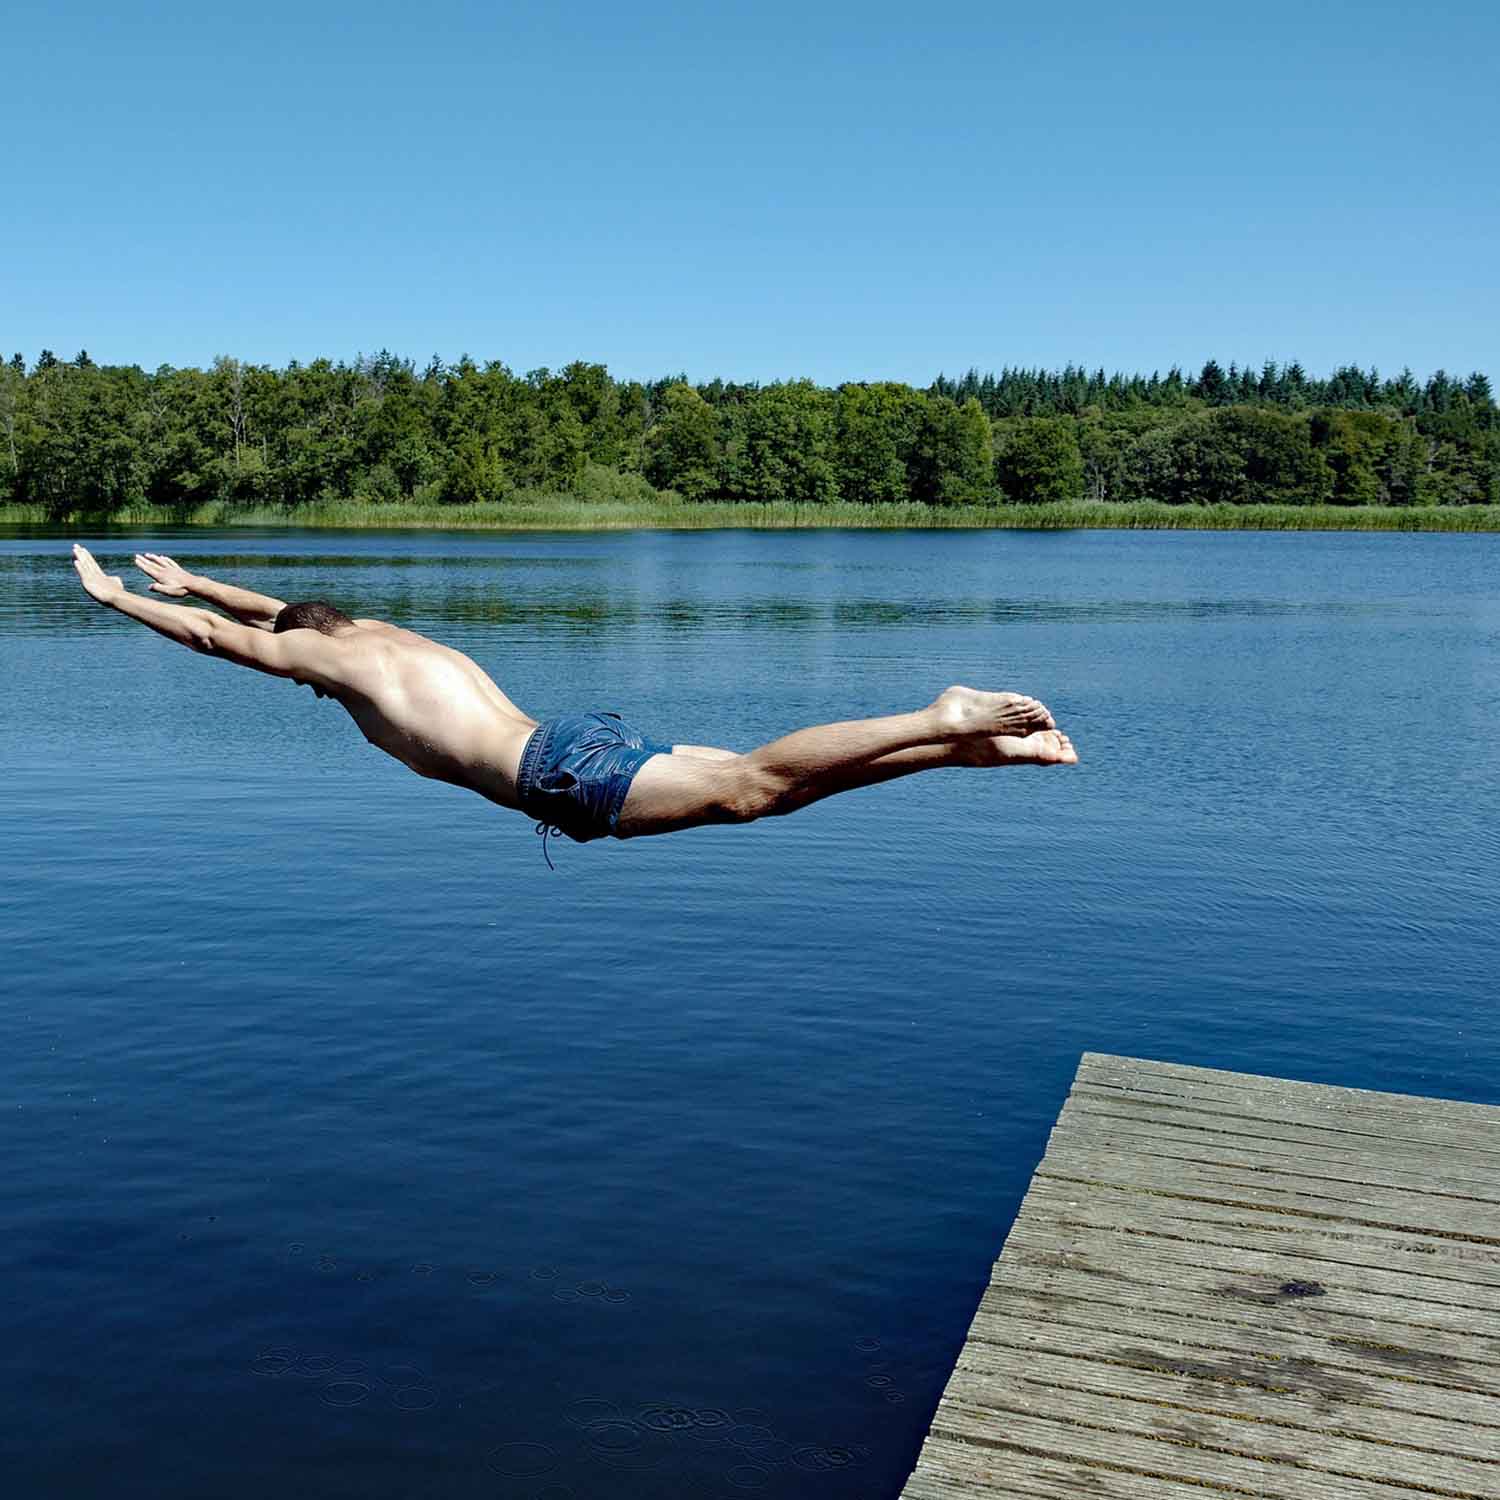 Photo of a man diving into a lake.